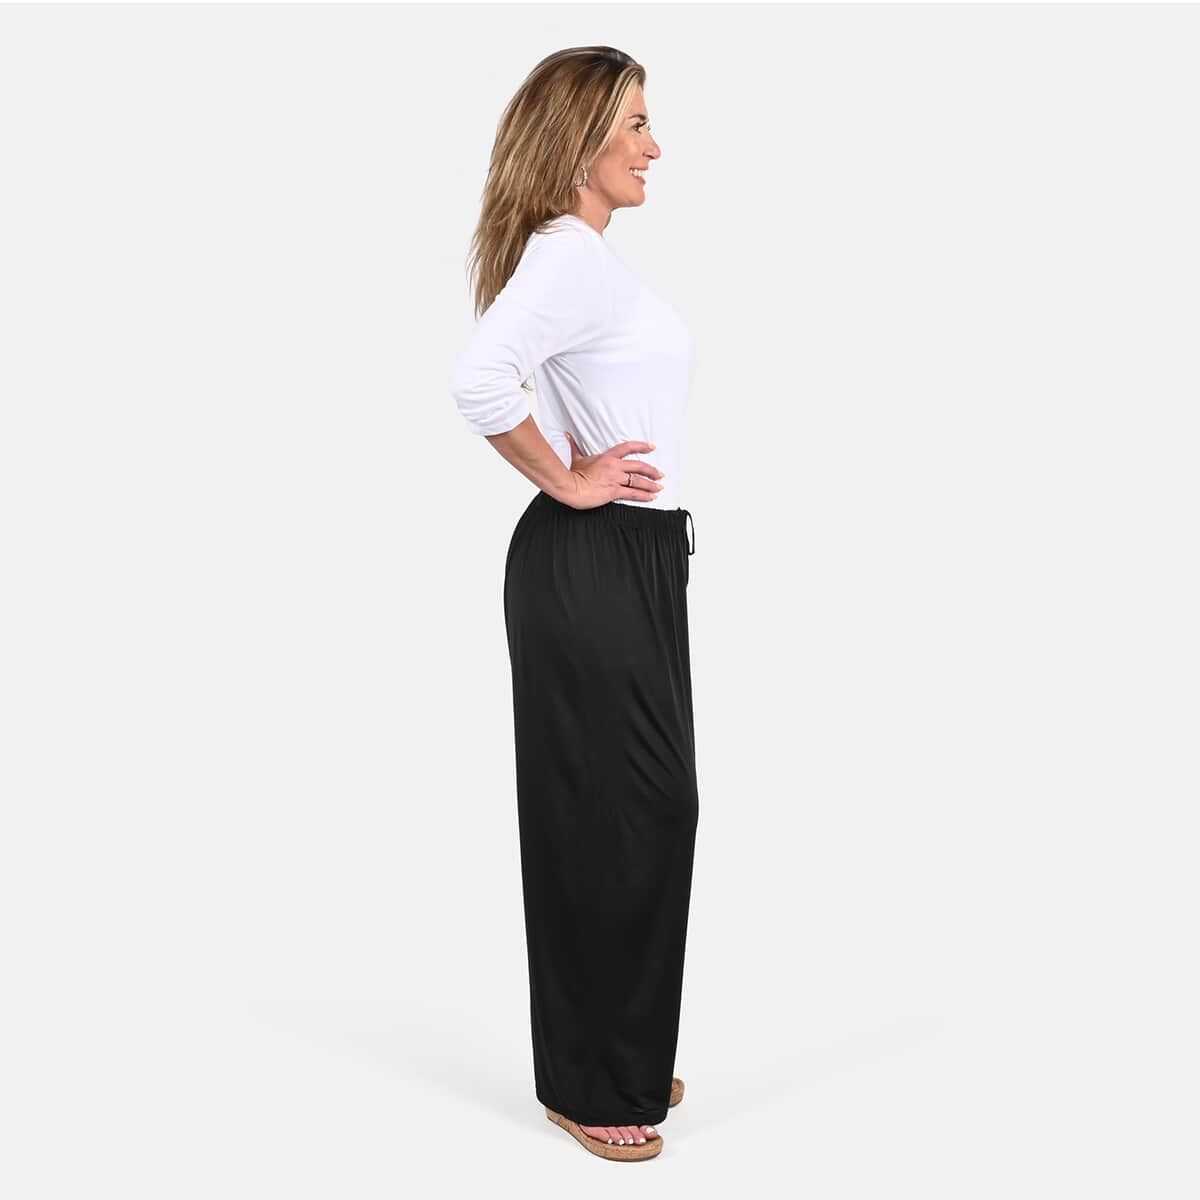 TAMSY Black Color Printed Trouser - One Size Fits Most image number 2